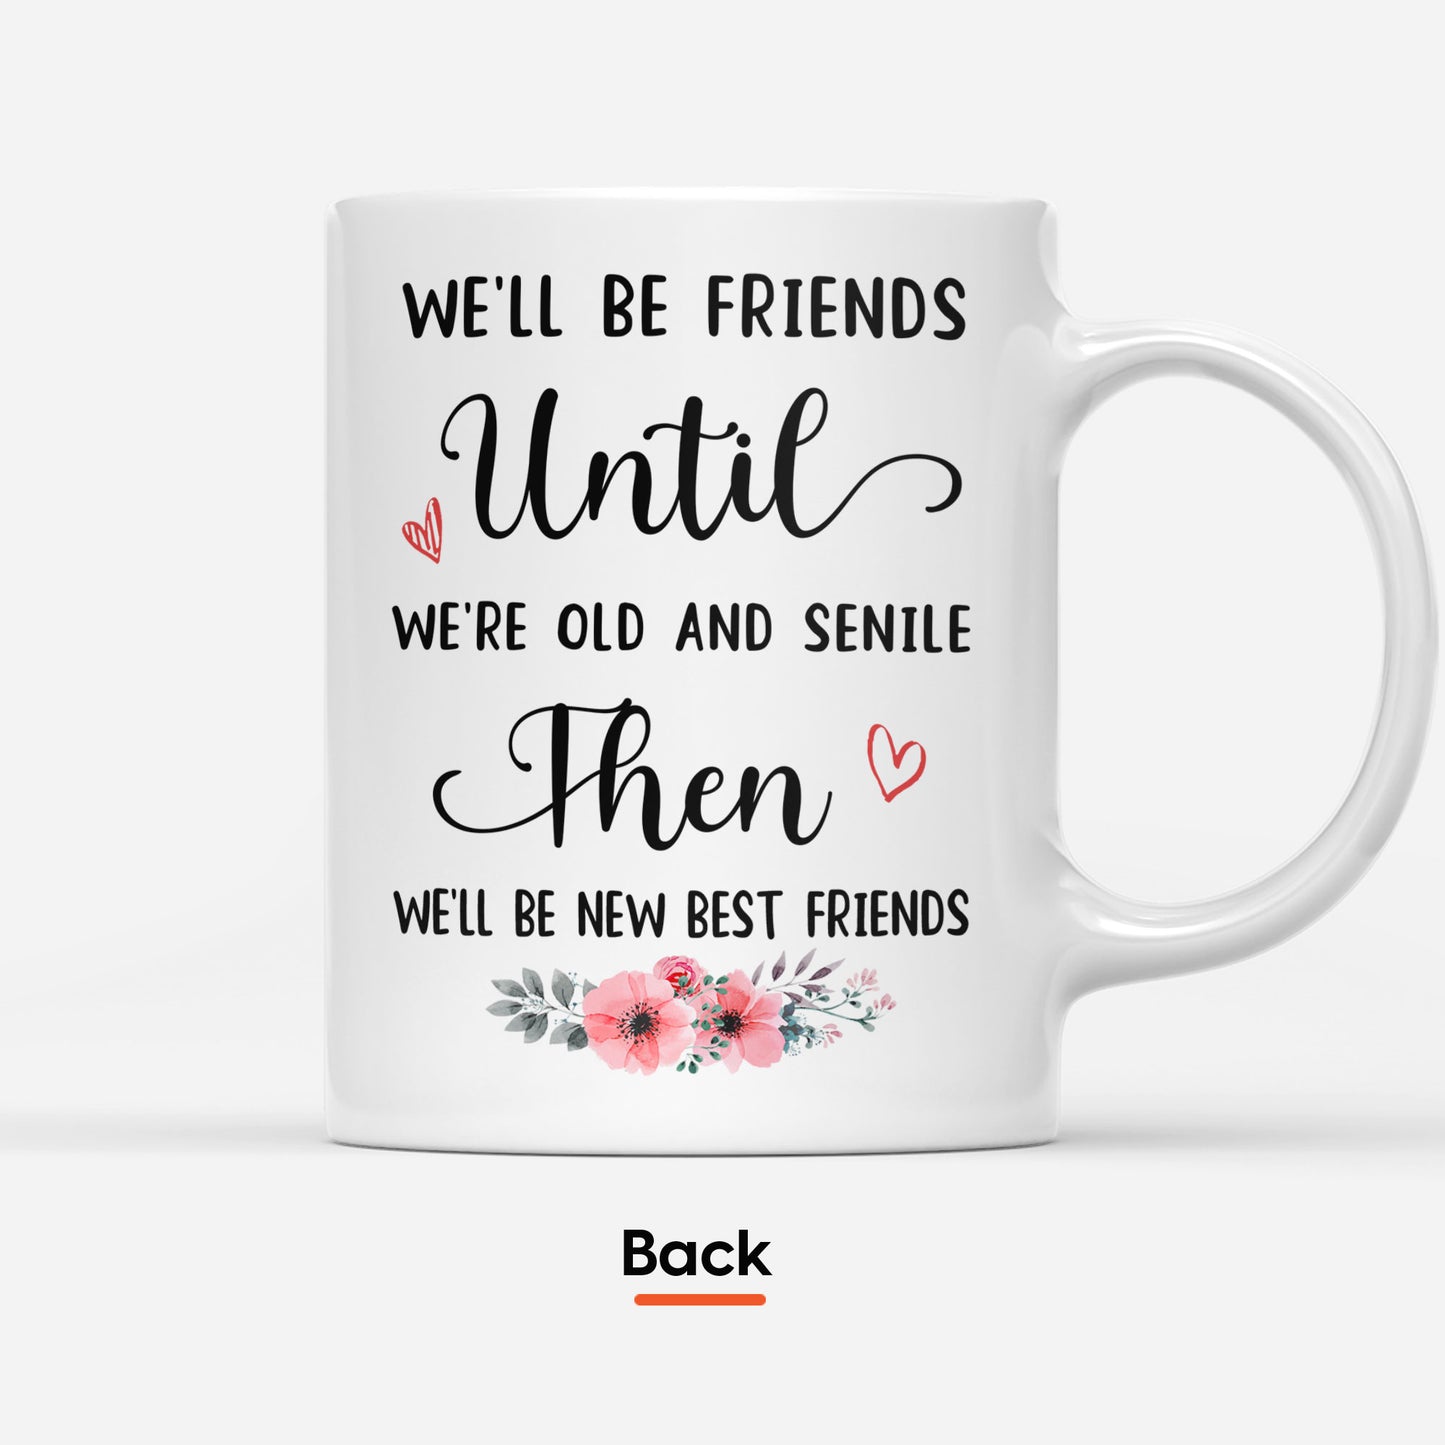 Squad Goals  - Personalized Mug - Gift For Friends